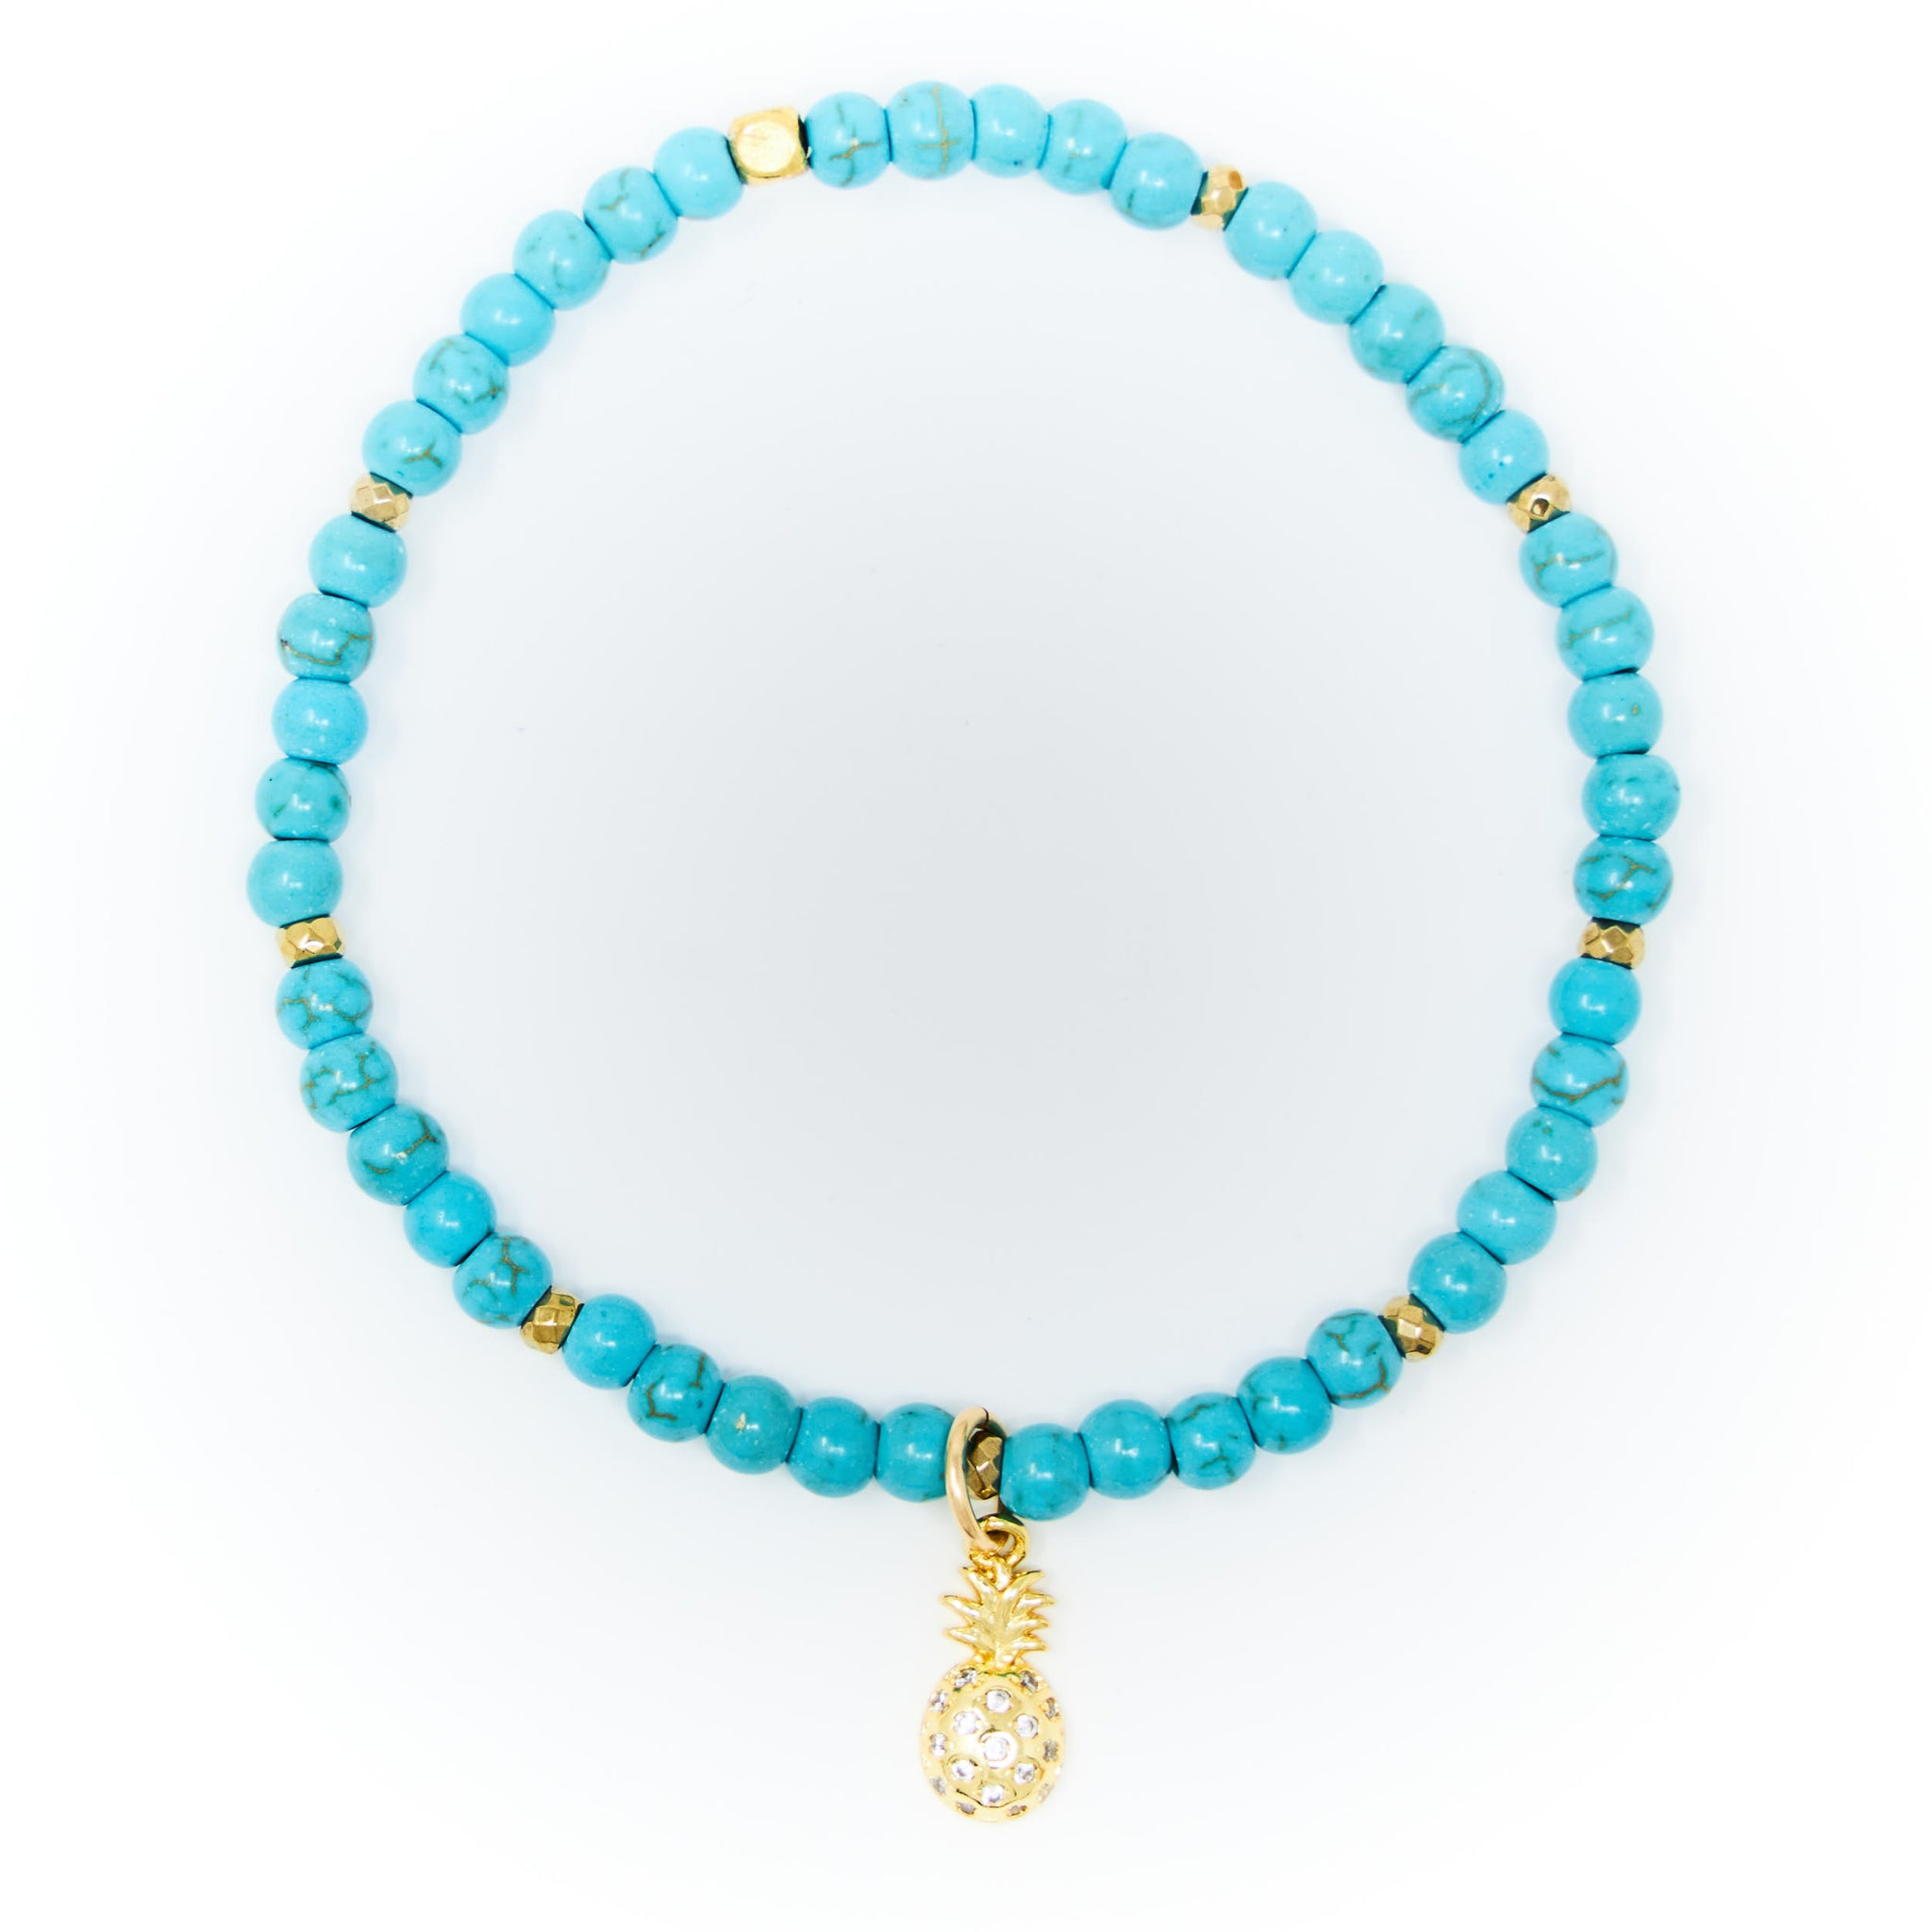 Turquoise Matte with Gold Bracelet, Gold Pineapple Charm with Clear Zirconia